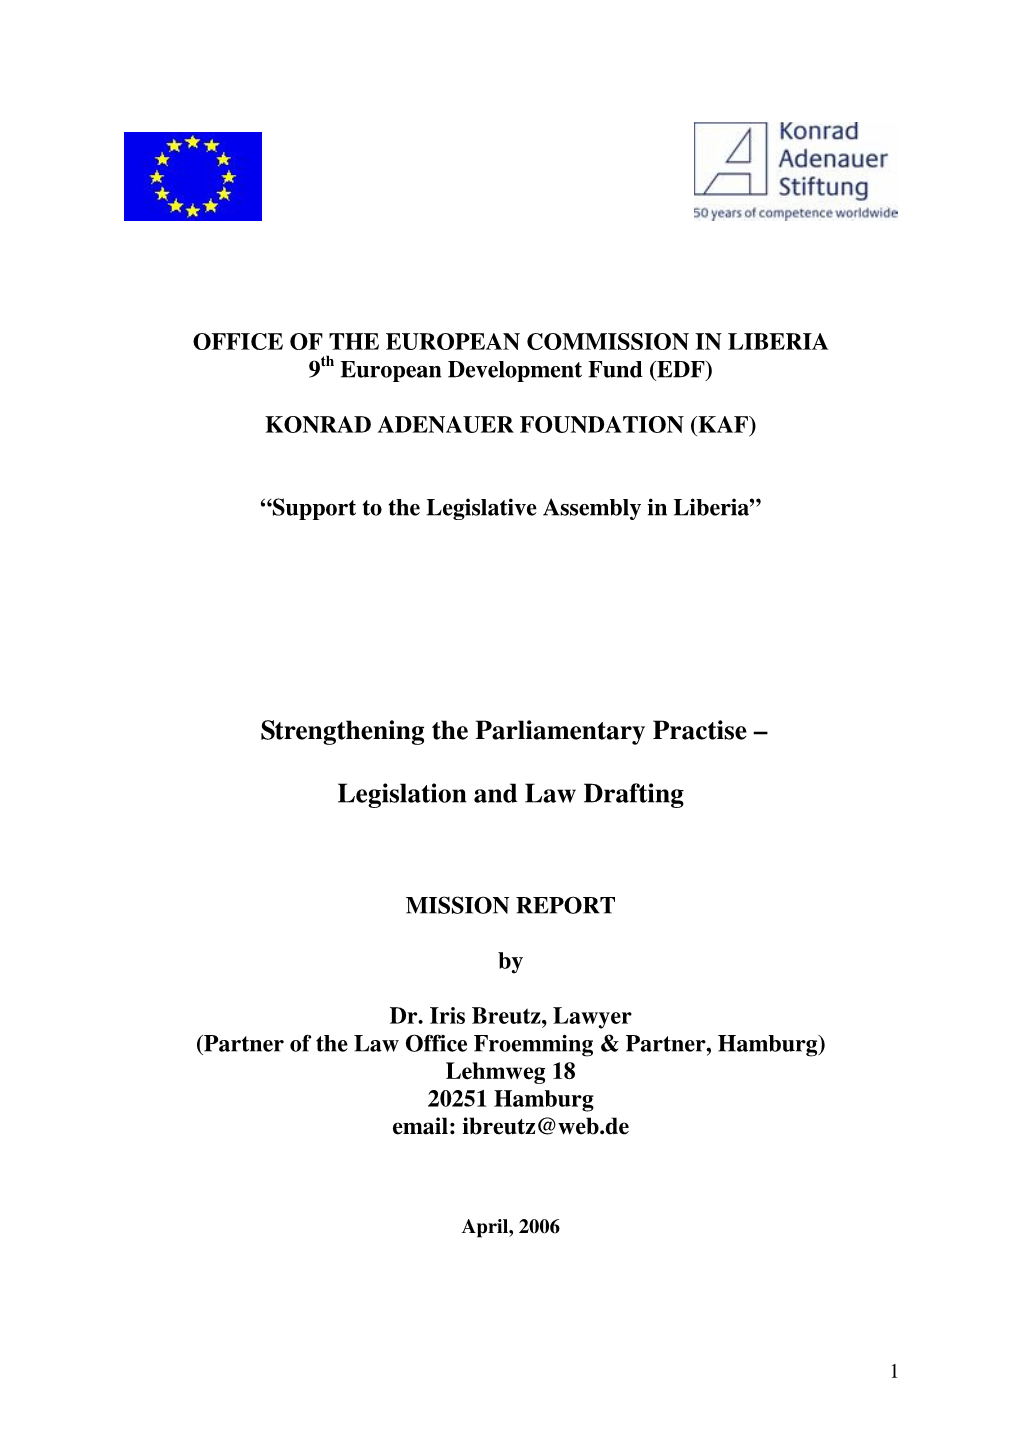 Strengthening the Parliamentary Practise – Legislation and Law